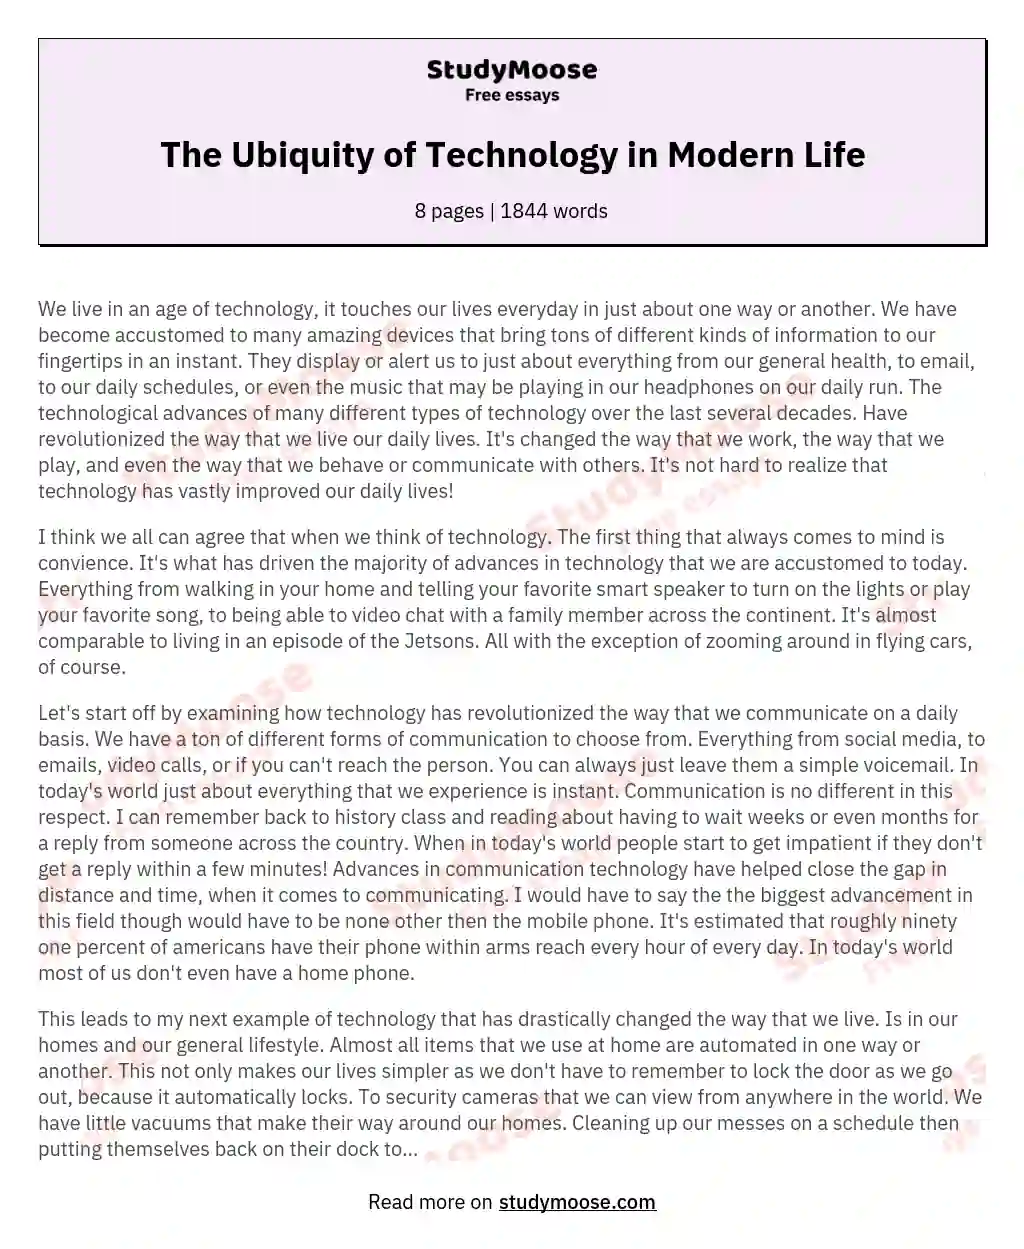 The Ubiquity of Technology in Modern Life essay